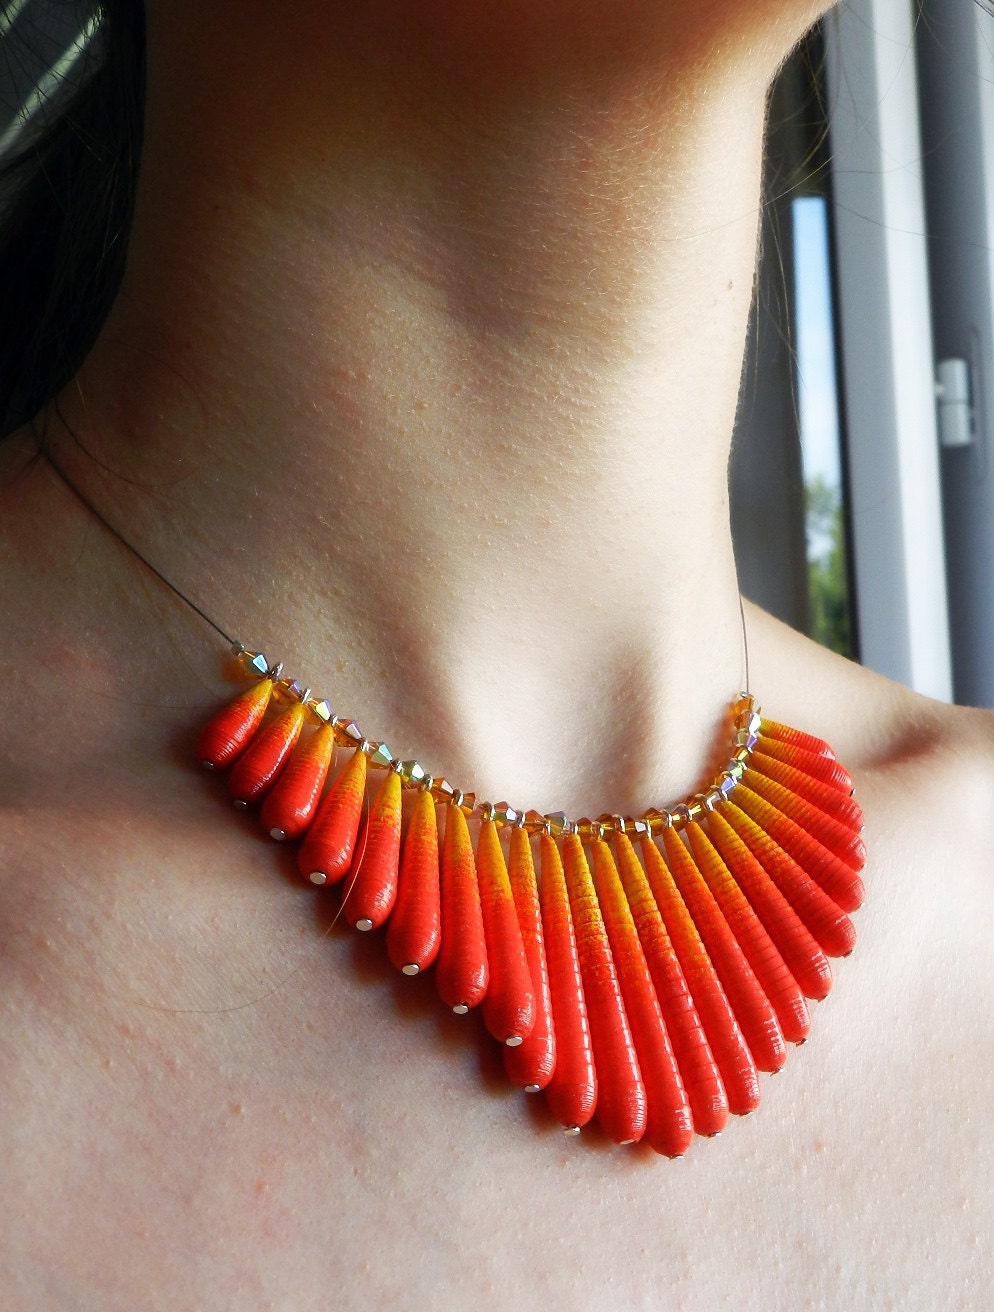 http://www.etsy.com/listing/175172190/ombre-red-and-yellow-necklace-made-with?ref=shop_home_active_13